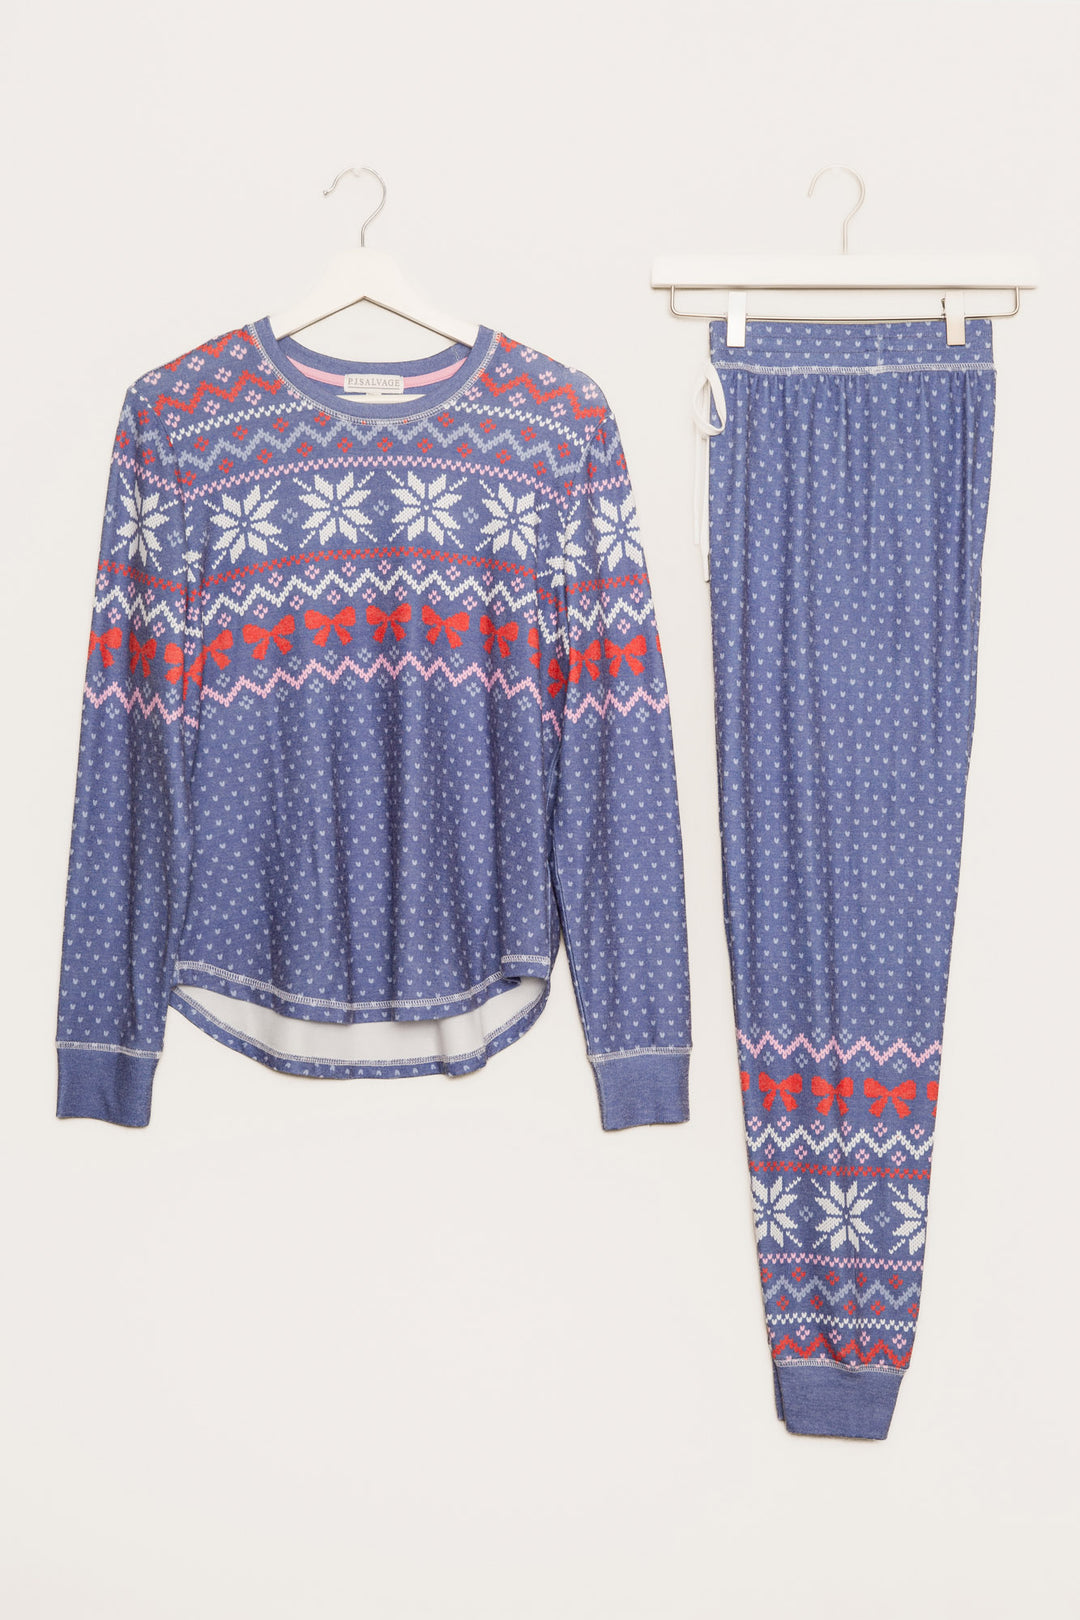 Pajama set in blue festive fair isle pattern in ivory-red-pink. Pullover top & jammie pant set. (7257677693028)